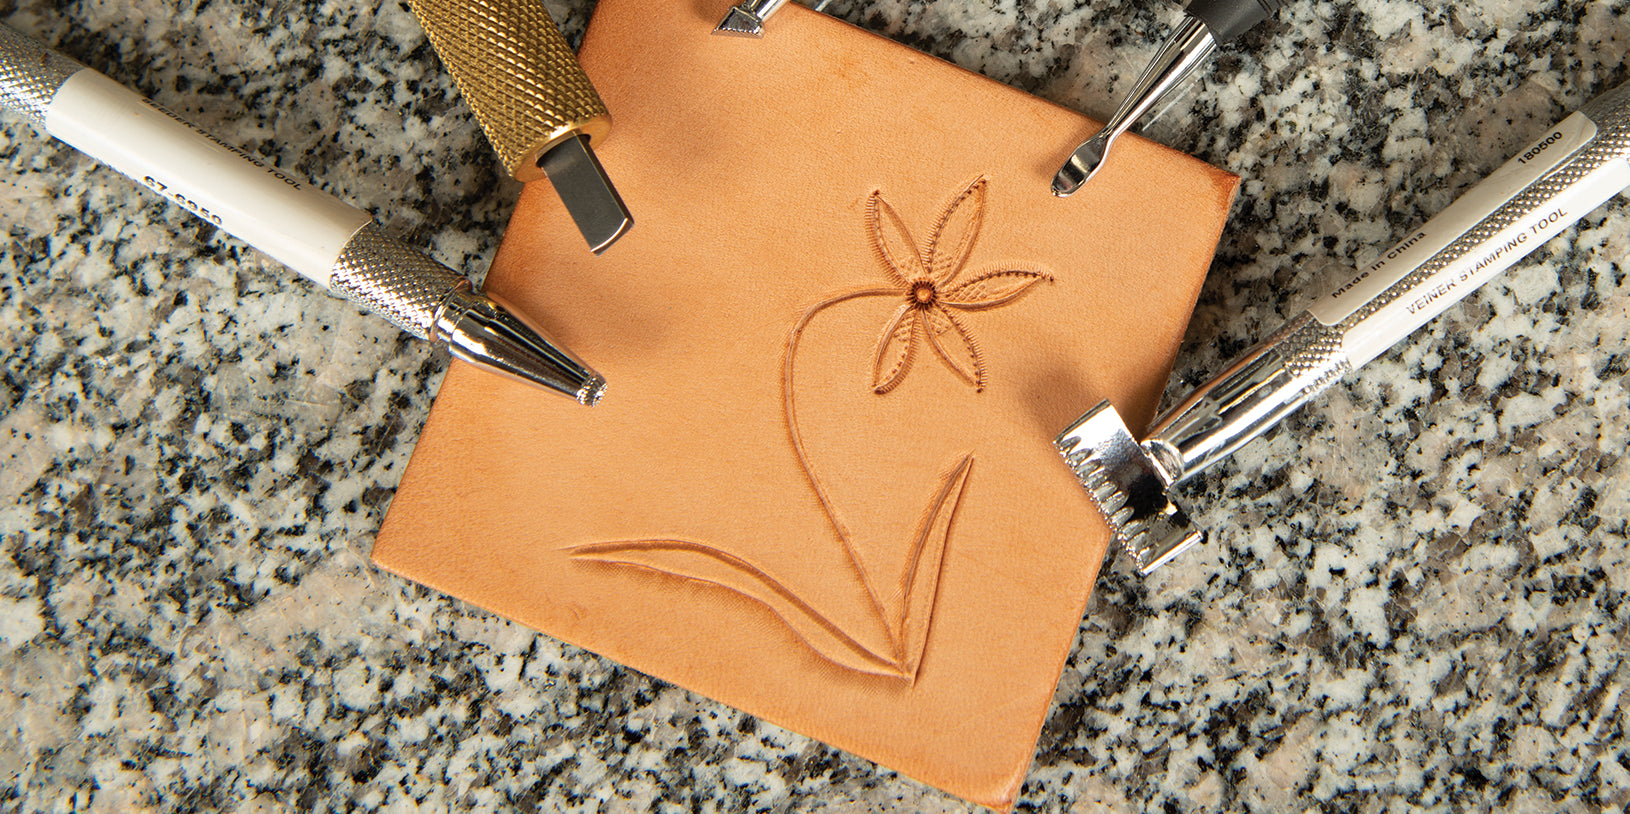 Easy-To-Follow Leather Stamping Tutorial for Beginners